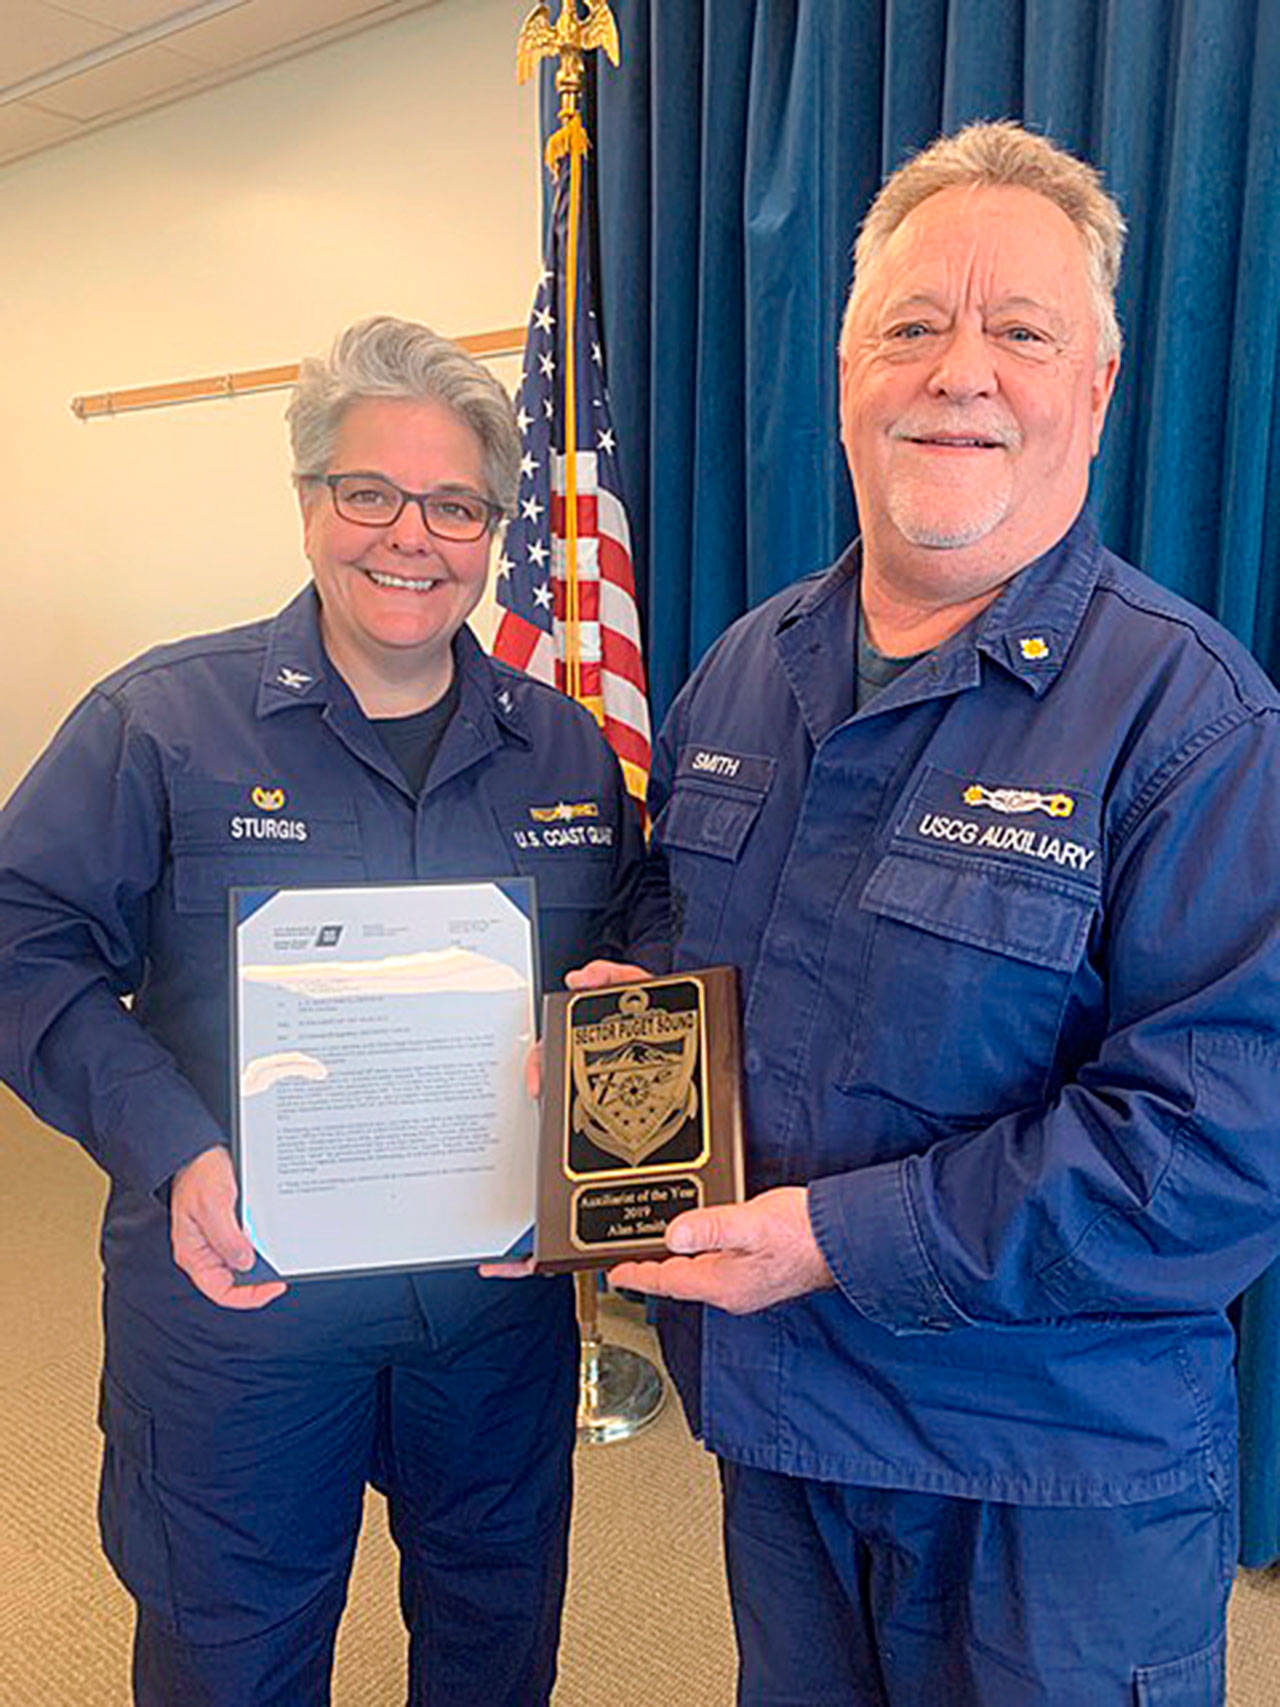 Capt. Linda A. Sturgis, U.S. Coast Guard Sector Puget Sound commander, helps honor Sequim’s Alan Smith, Sector Puget Sound Auxiliarist of the Year for 2019. Photo by Kent Brown/USCG Auxiliary